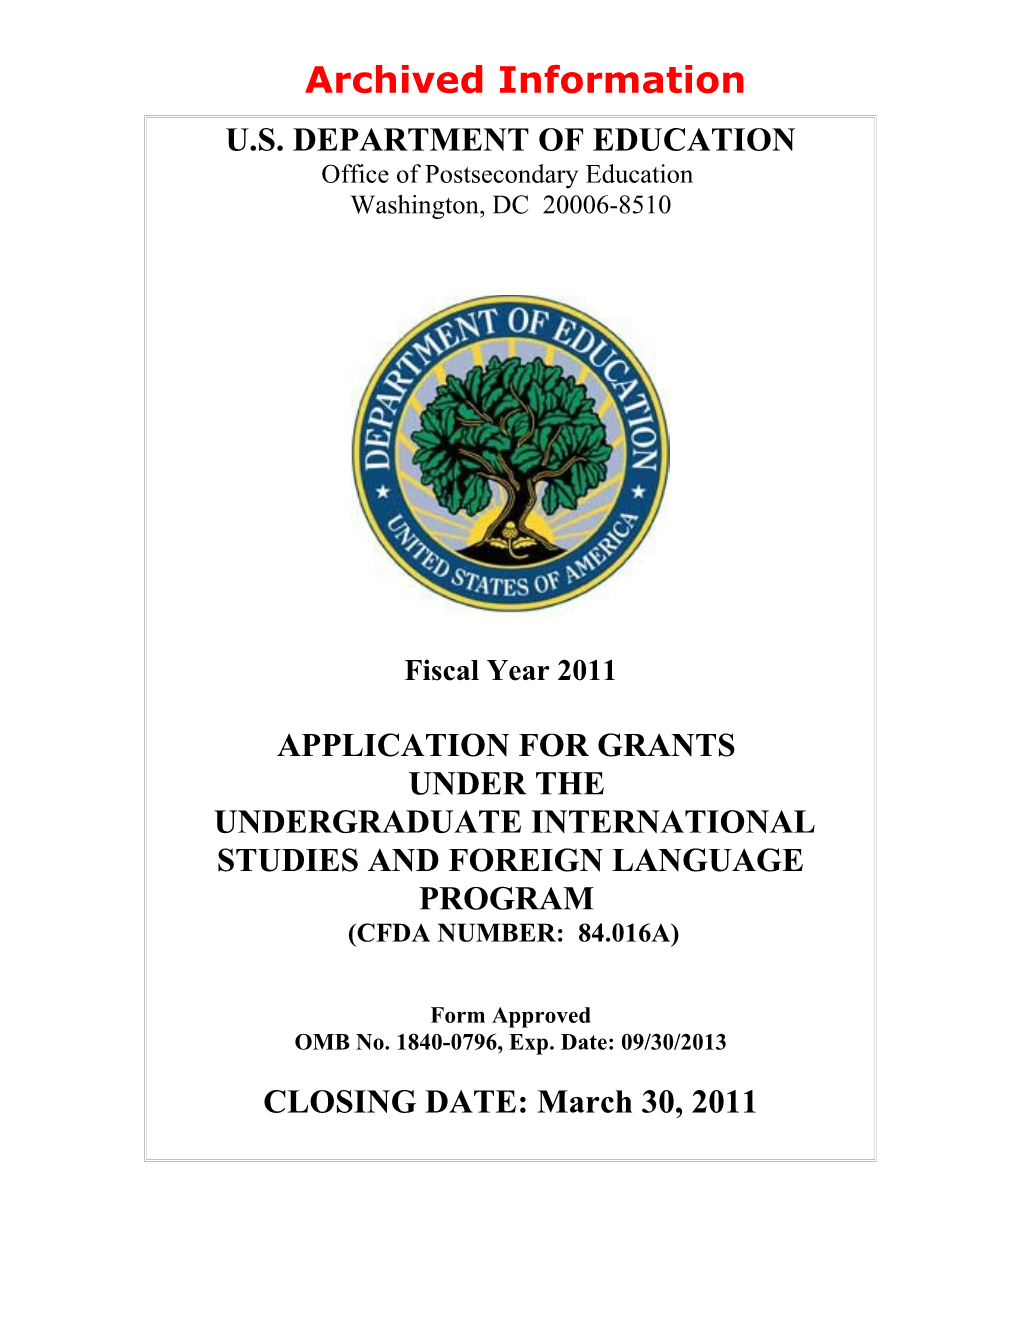 Archived: FY 2011 Grant Application for the Undergraduate International Studies and Foreign